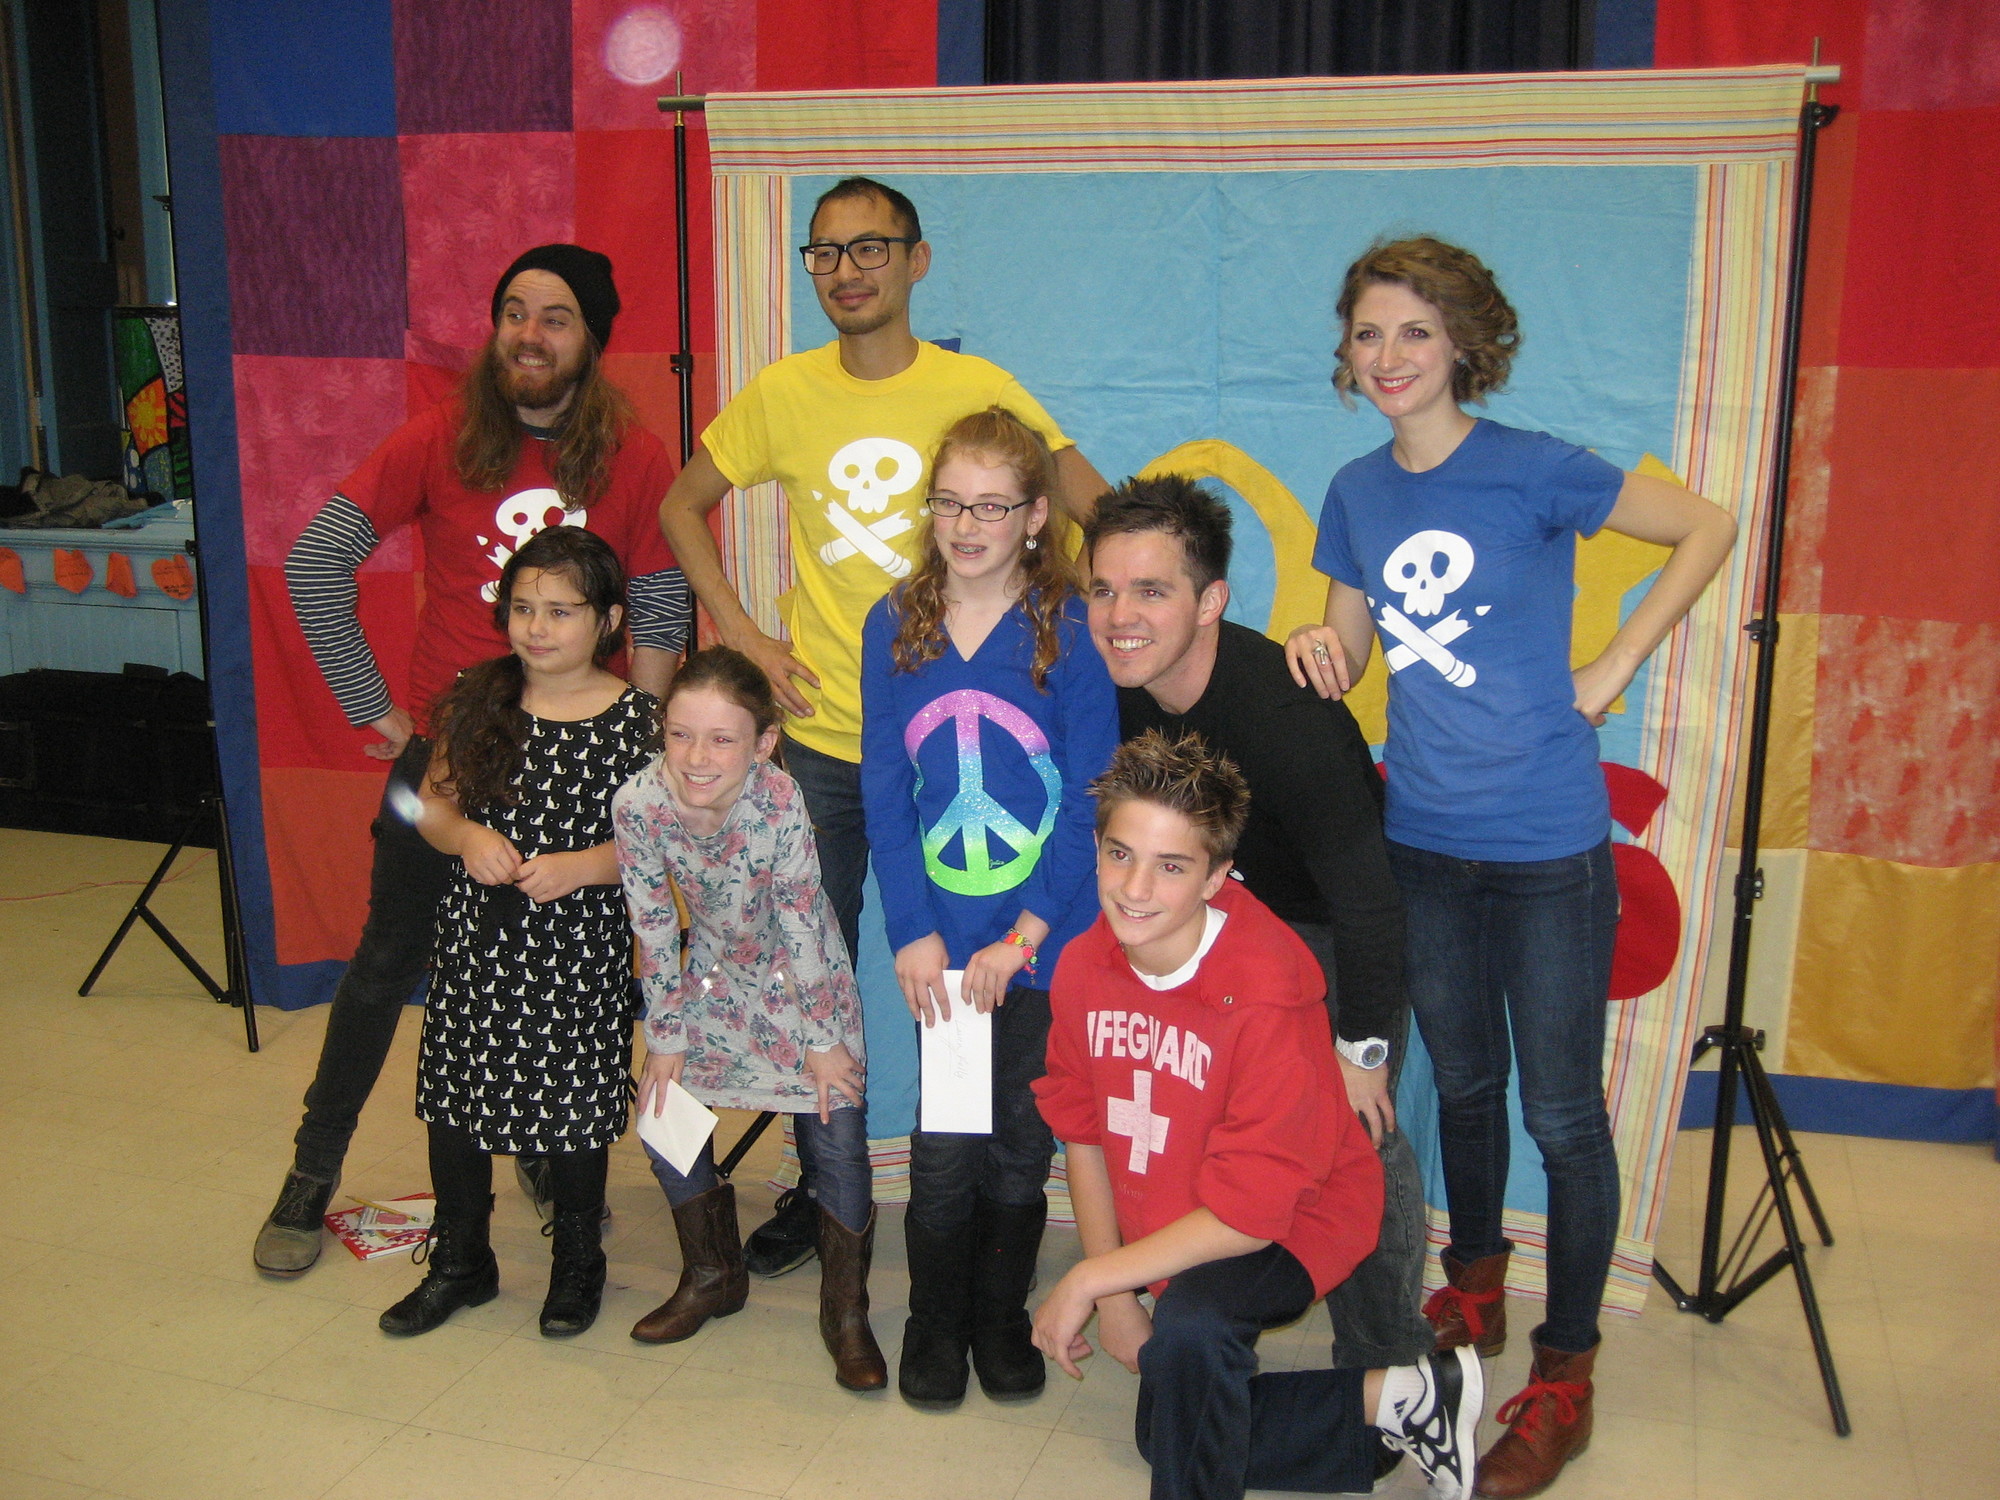 Student Authors Gabriella Folk, Shannon Monaco, Lauren Kelly, and Michael Mistretta with The Story Pirates.